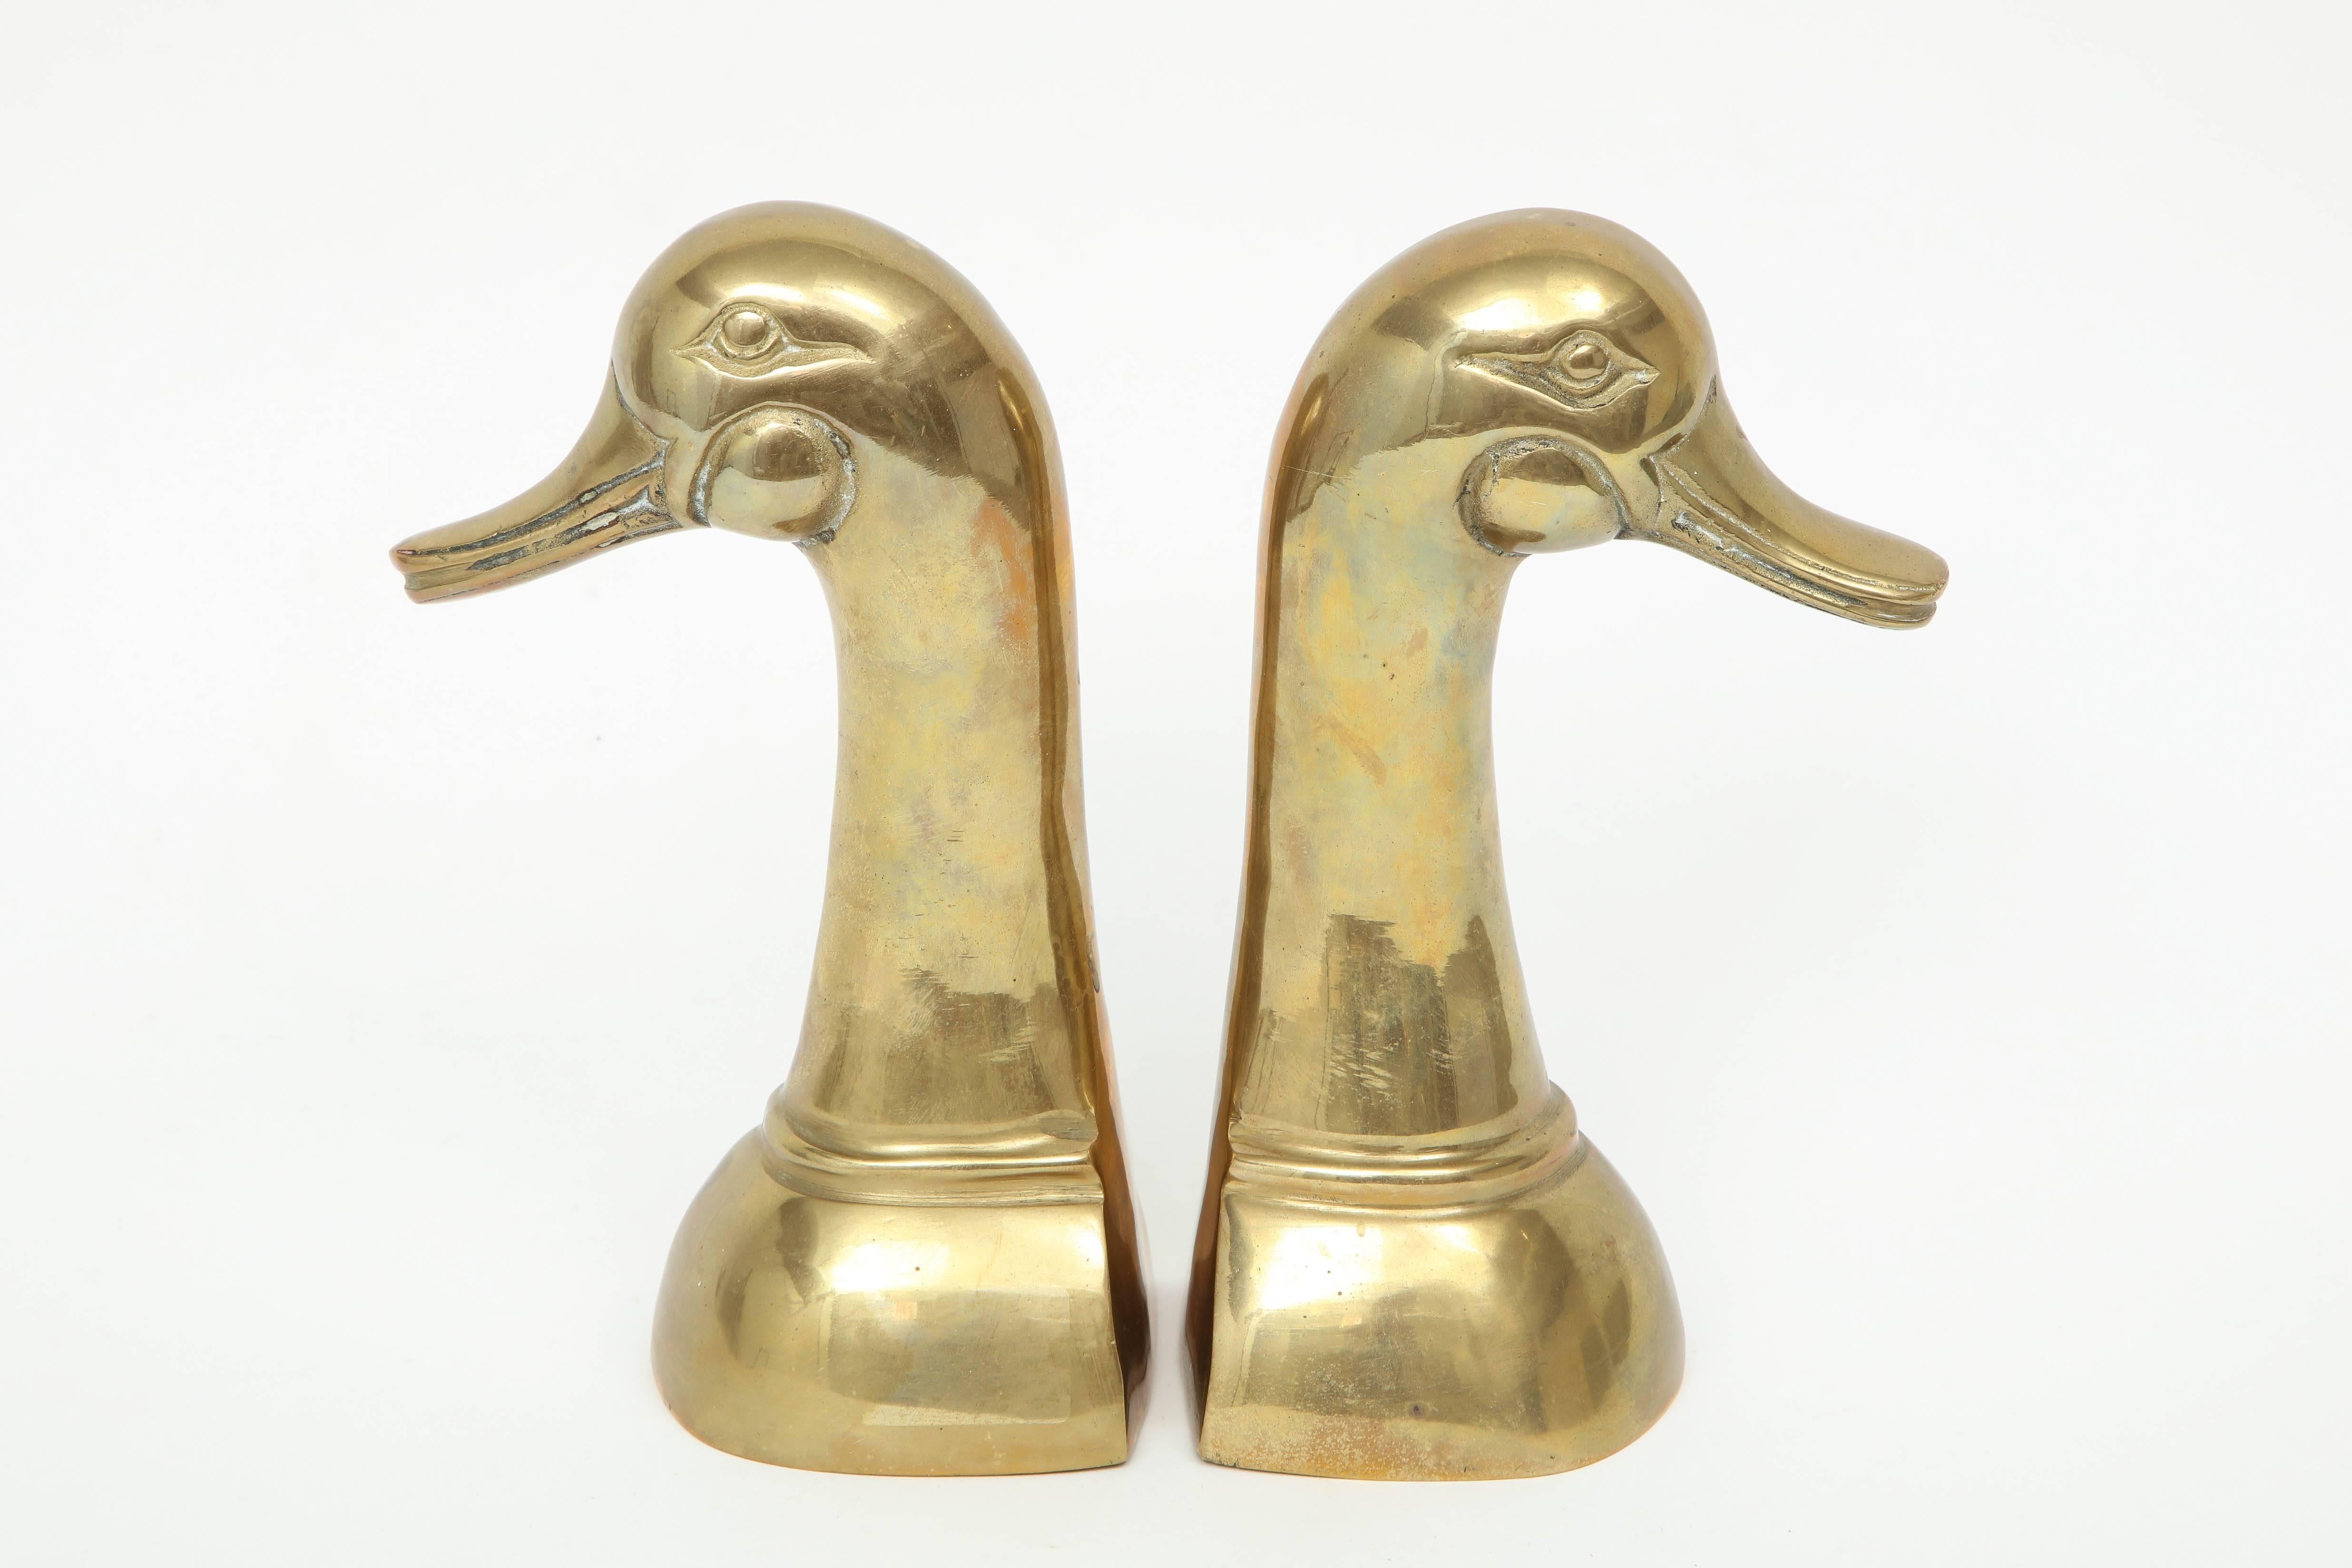 Pair of midcentury brass Mallard duck bookends with an aged warm glow patina.